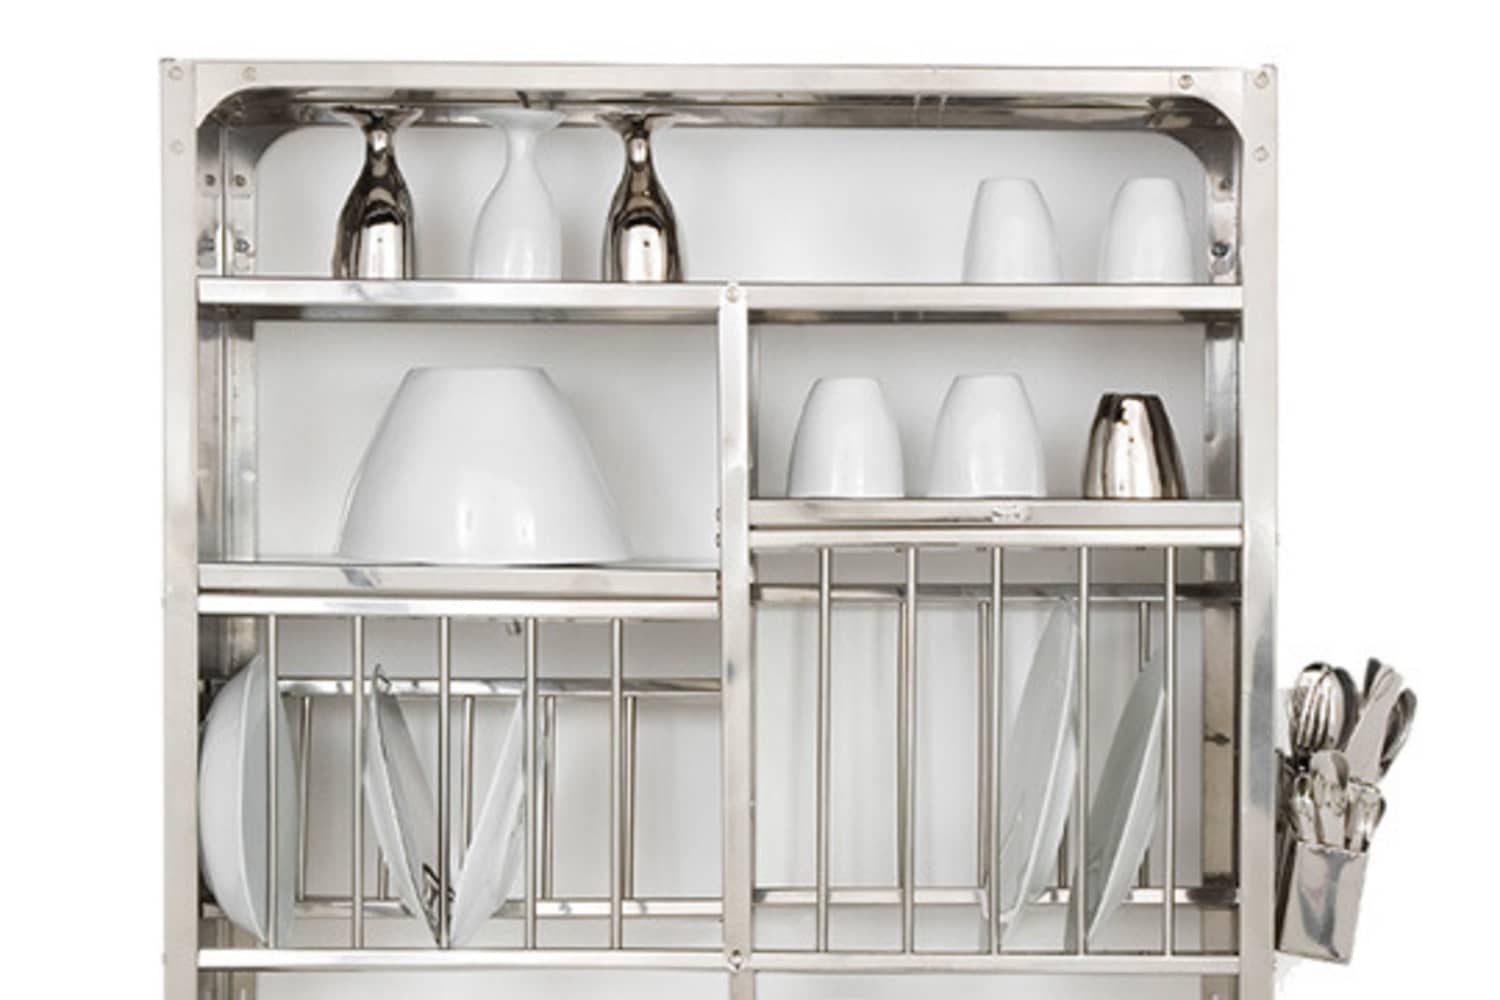 Dish Drying Rack in stainless steel wall mounted